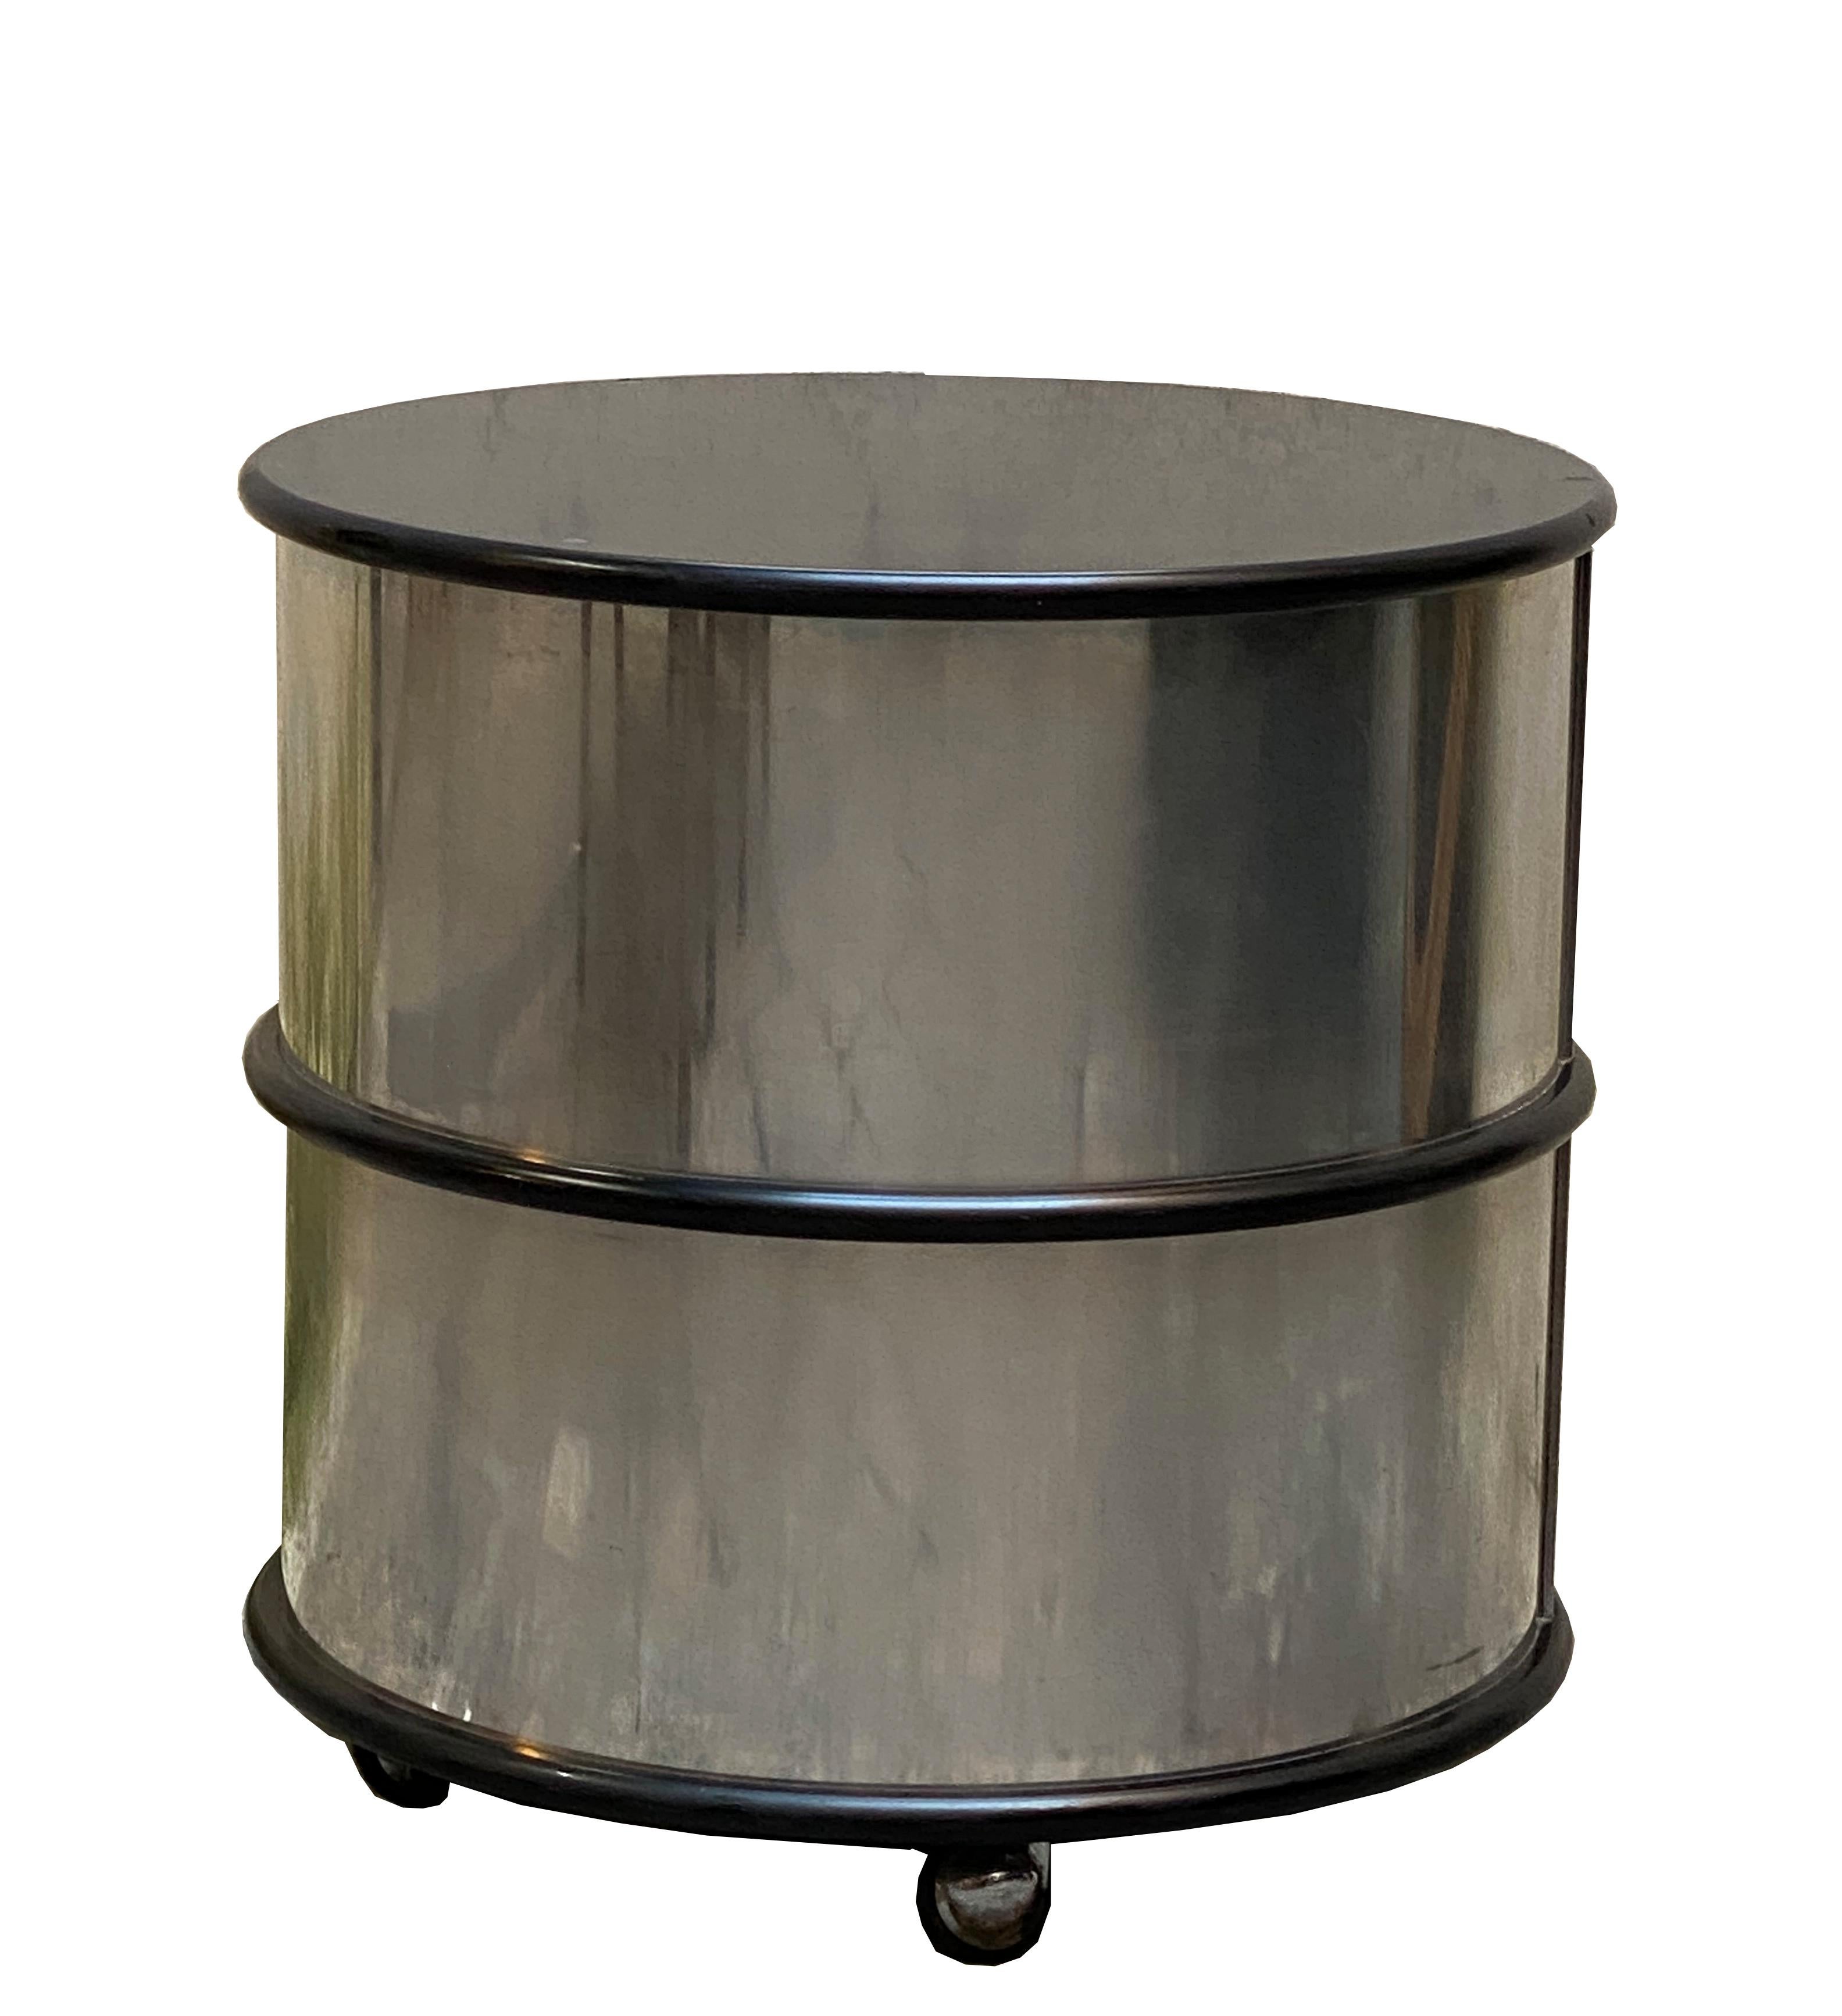 Round bedside table or side table in black lacquered wood and chrome with wheels, produced in Italy in the 1970s, design Luciano Frigerio style.
 